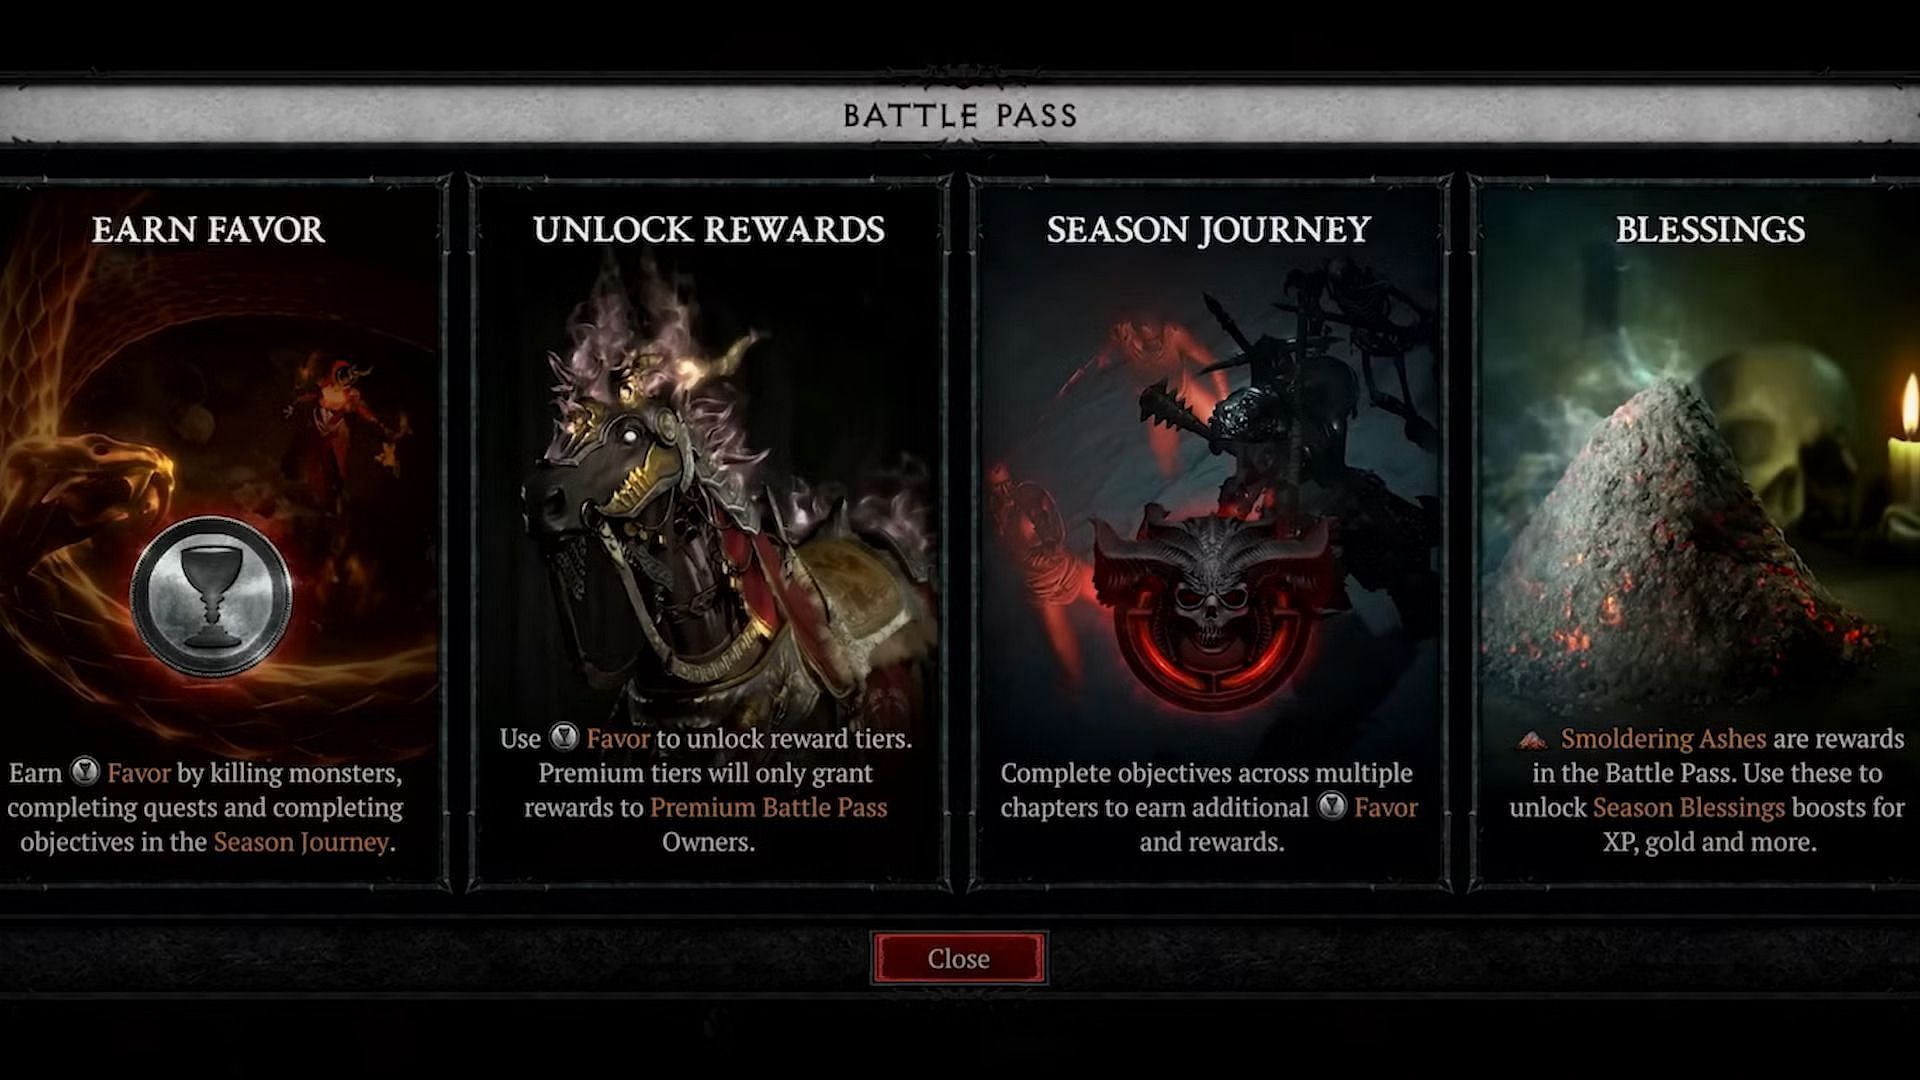 You can earn rewards from Season of the Malignant battle pass (Image via Blizzard Entertainment)